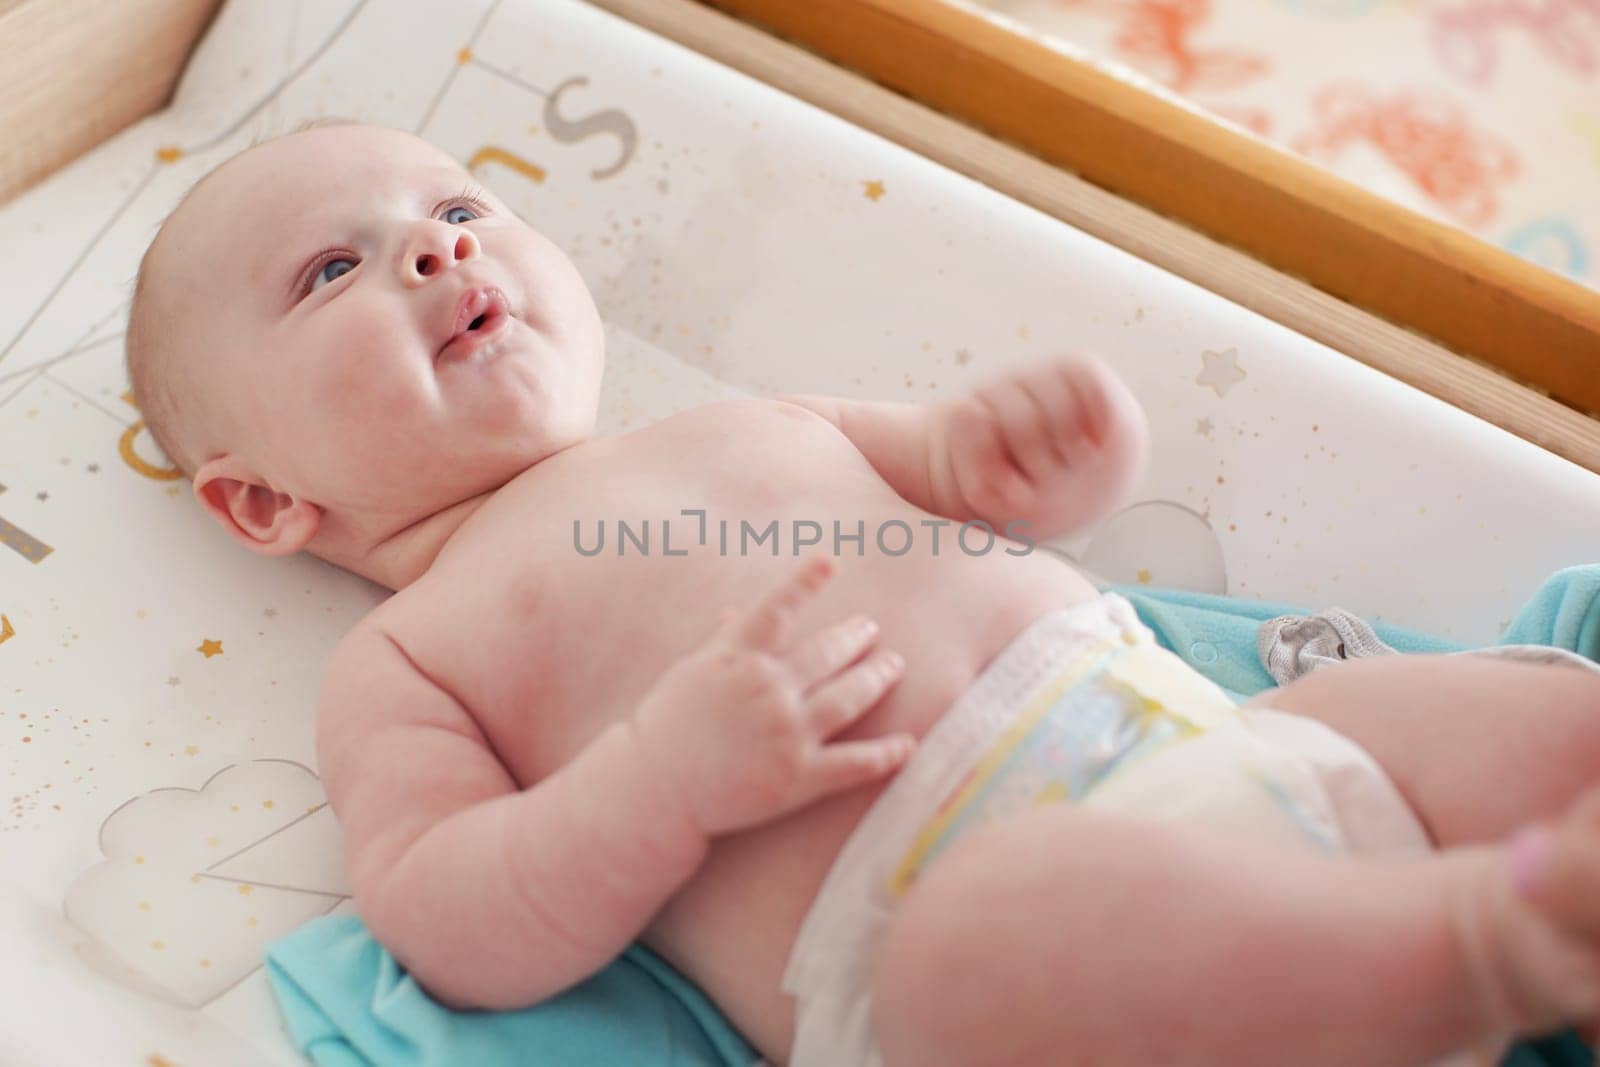 4 months old infant boy lying on changing desk, by Ivanko